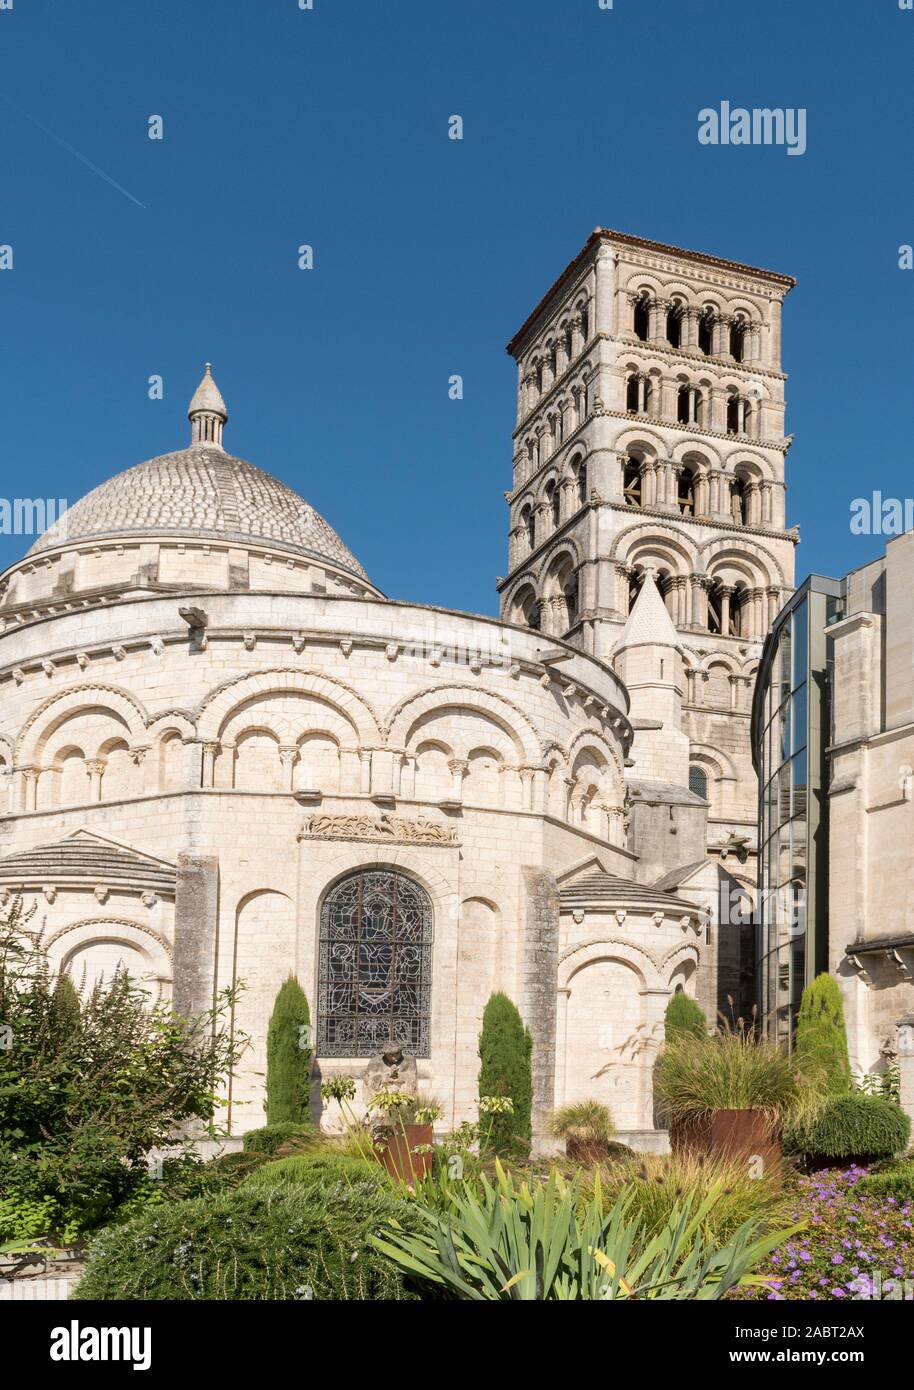 The Romanesque Cathedral of Angouleme, France. Stock Photo